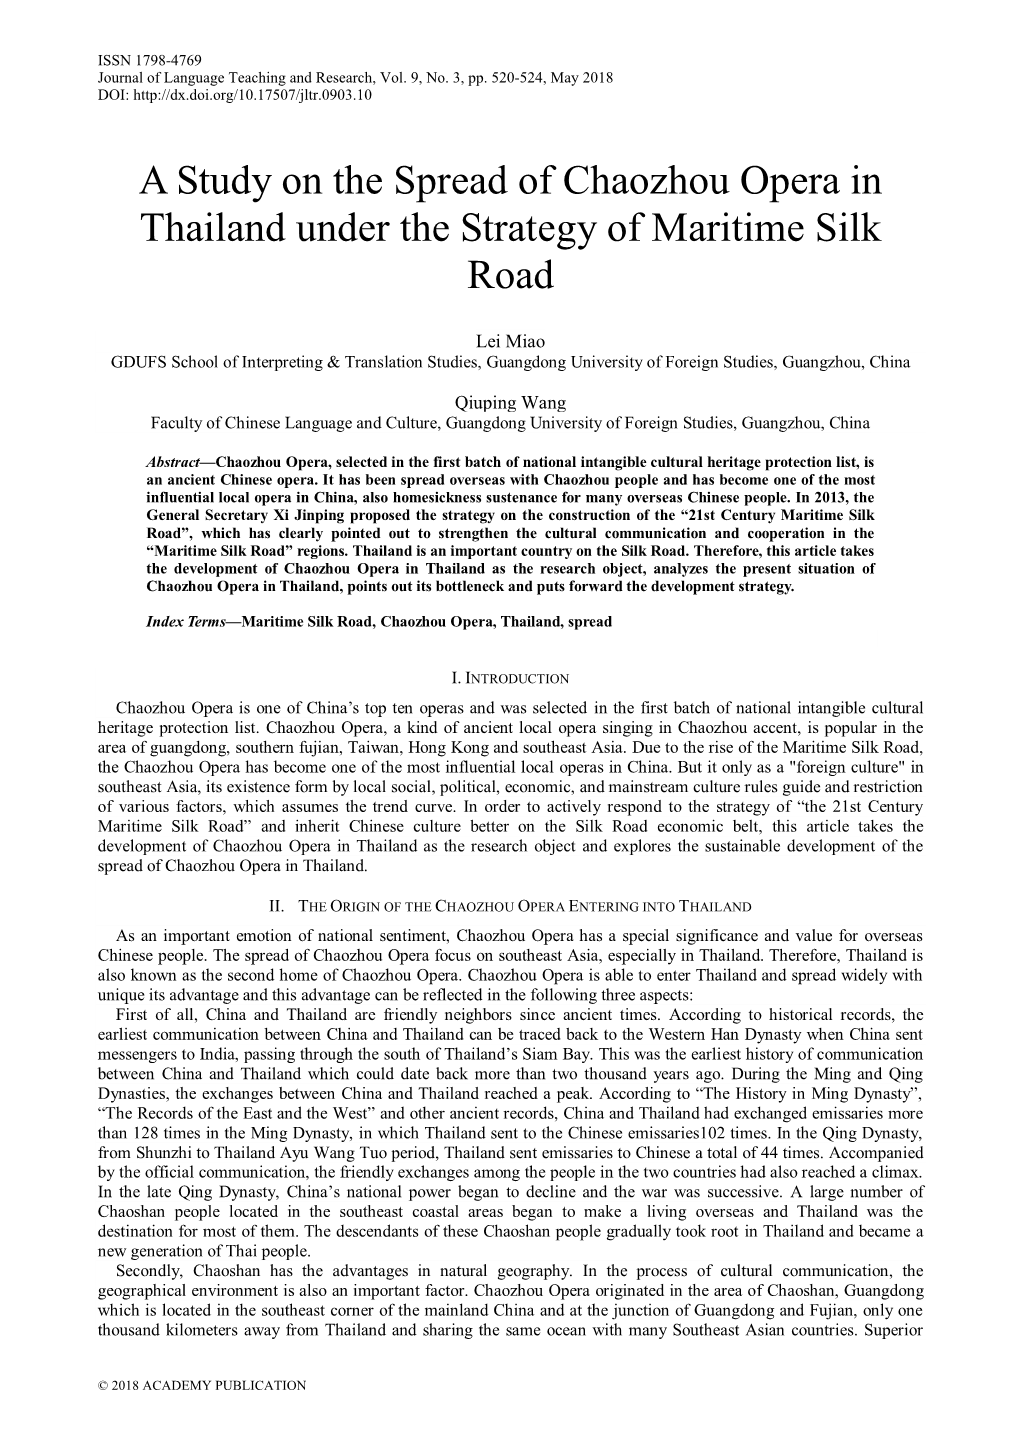 A Study on the Spread of Chaozhou Opera in Thailand Under the Strategy of Maritime Silk Road